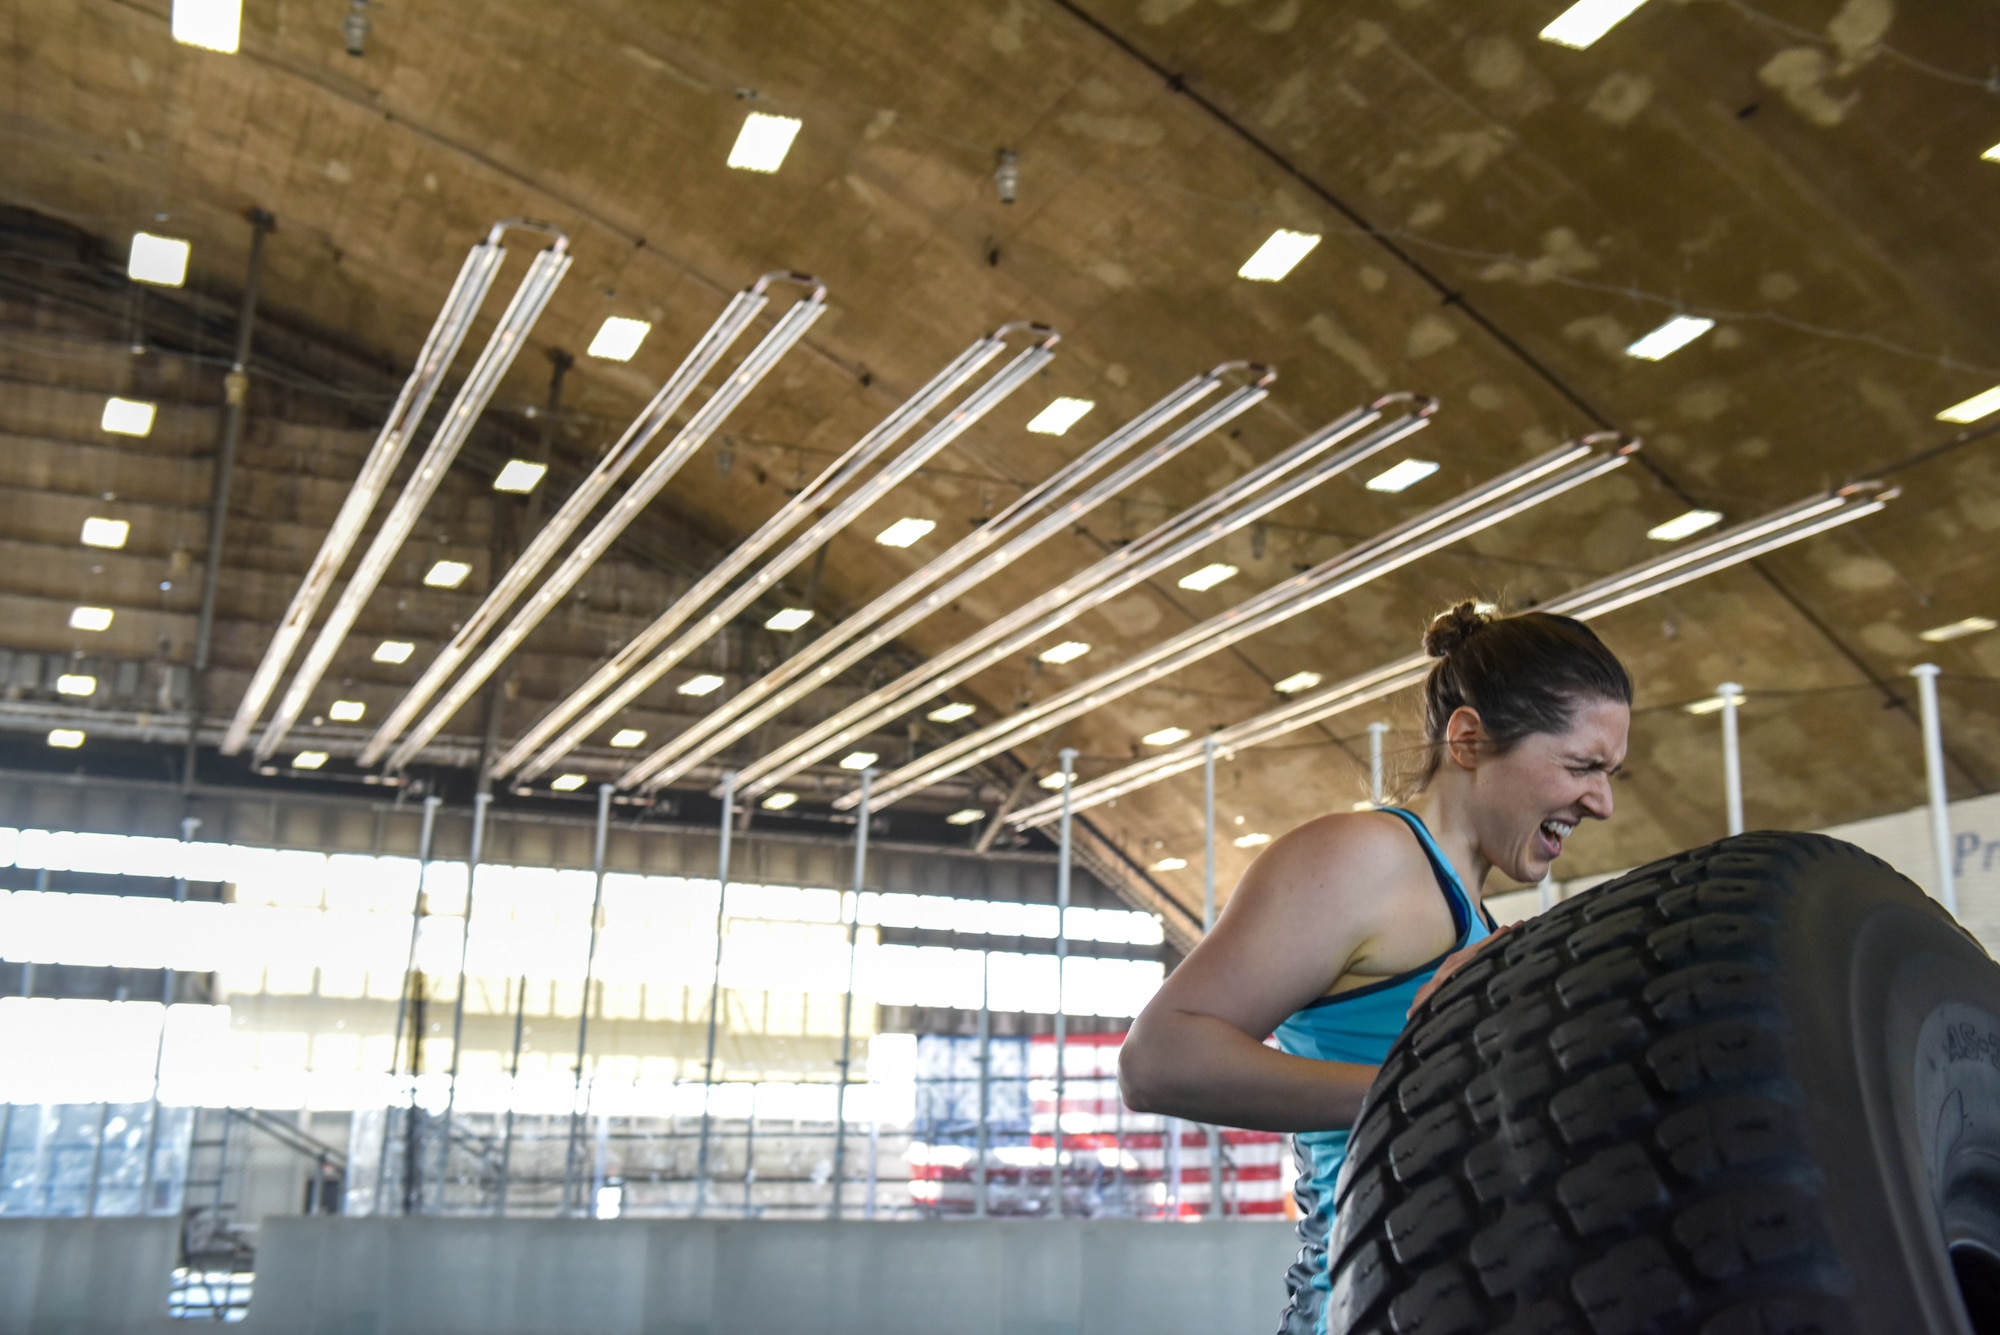 Eugene Weaver, a military spouse, flips a tire down the Pride Hangar’s turf field during the Ellsworth Air Force Base’s Strongest Competition on Ellsworth AFB, S.D., April 25, 2019. The free sporting event was hosted by the 28th Force Support Squadron. Competitors performed feats of strength throughout five different exercises: max-out deadlift, farmer’s carry, keg run, tire flip and vehicle pull. Weaver placed third in the strongest female category. (U.S. Air Force photo by Tech. Sgt. Jette Carr)